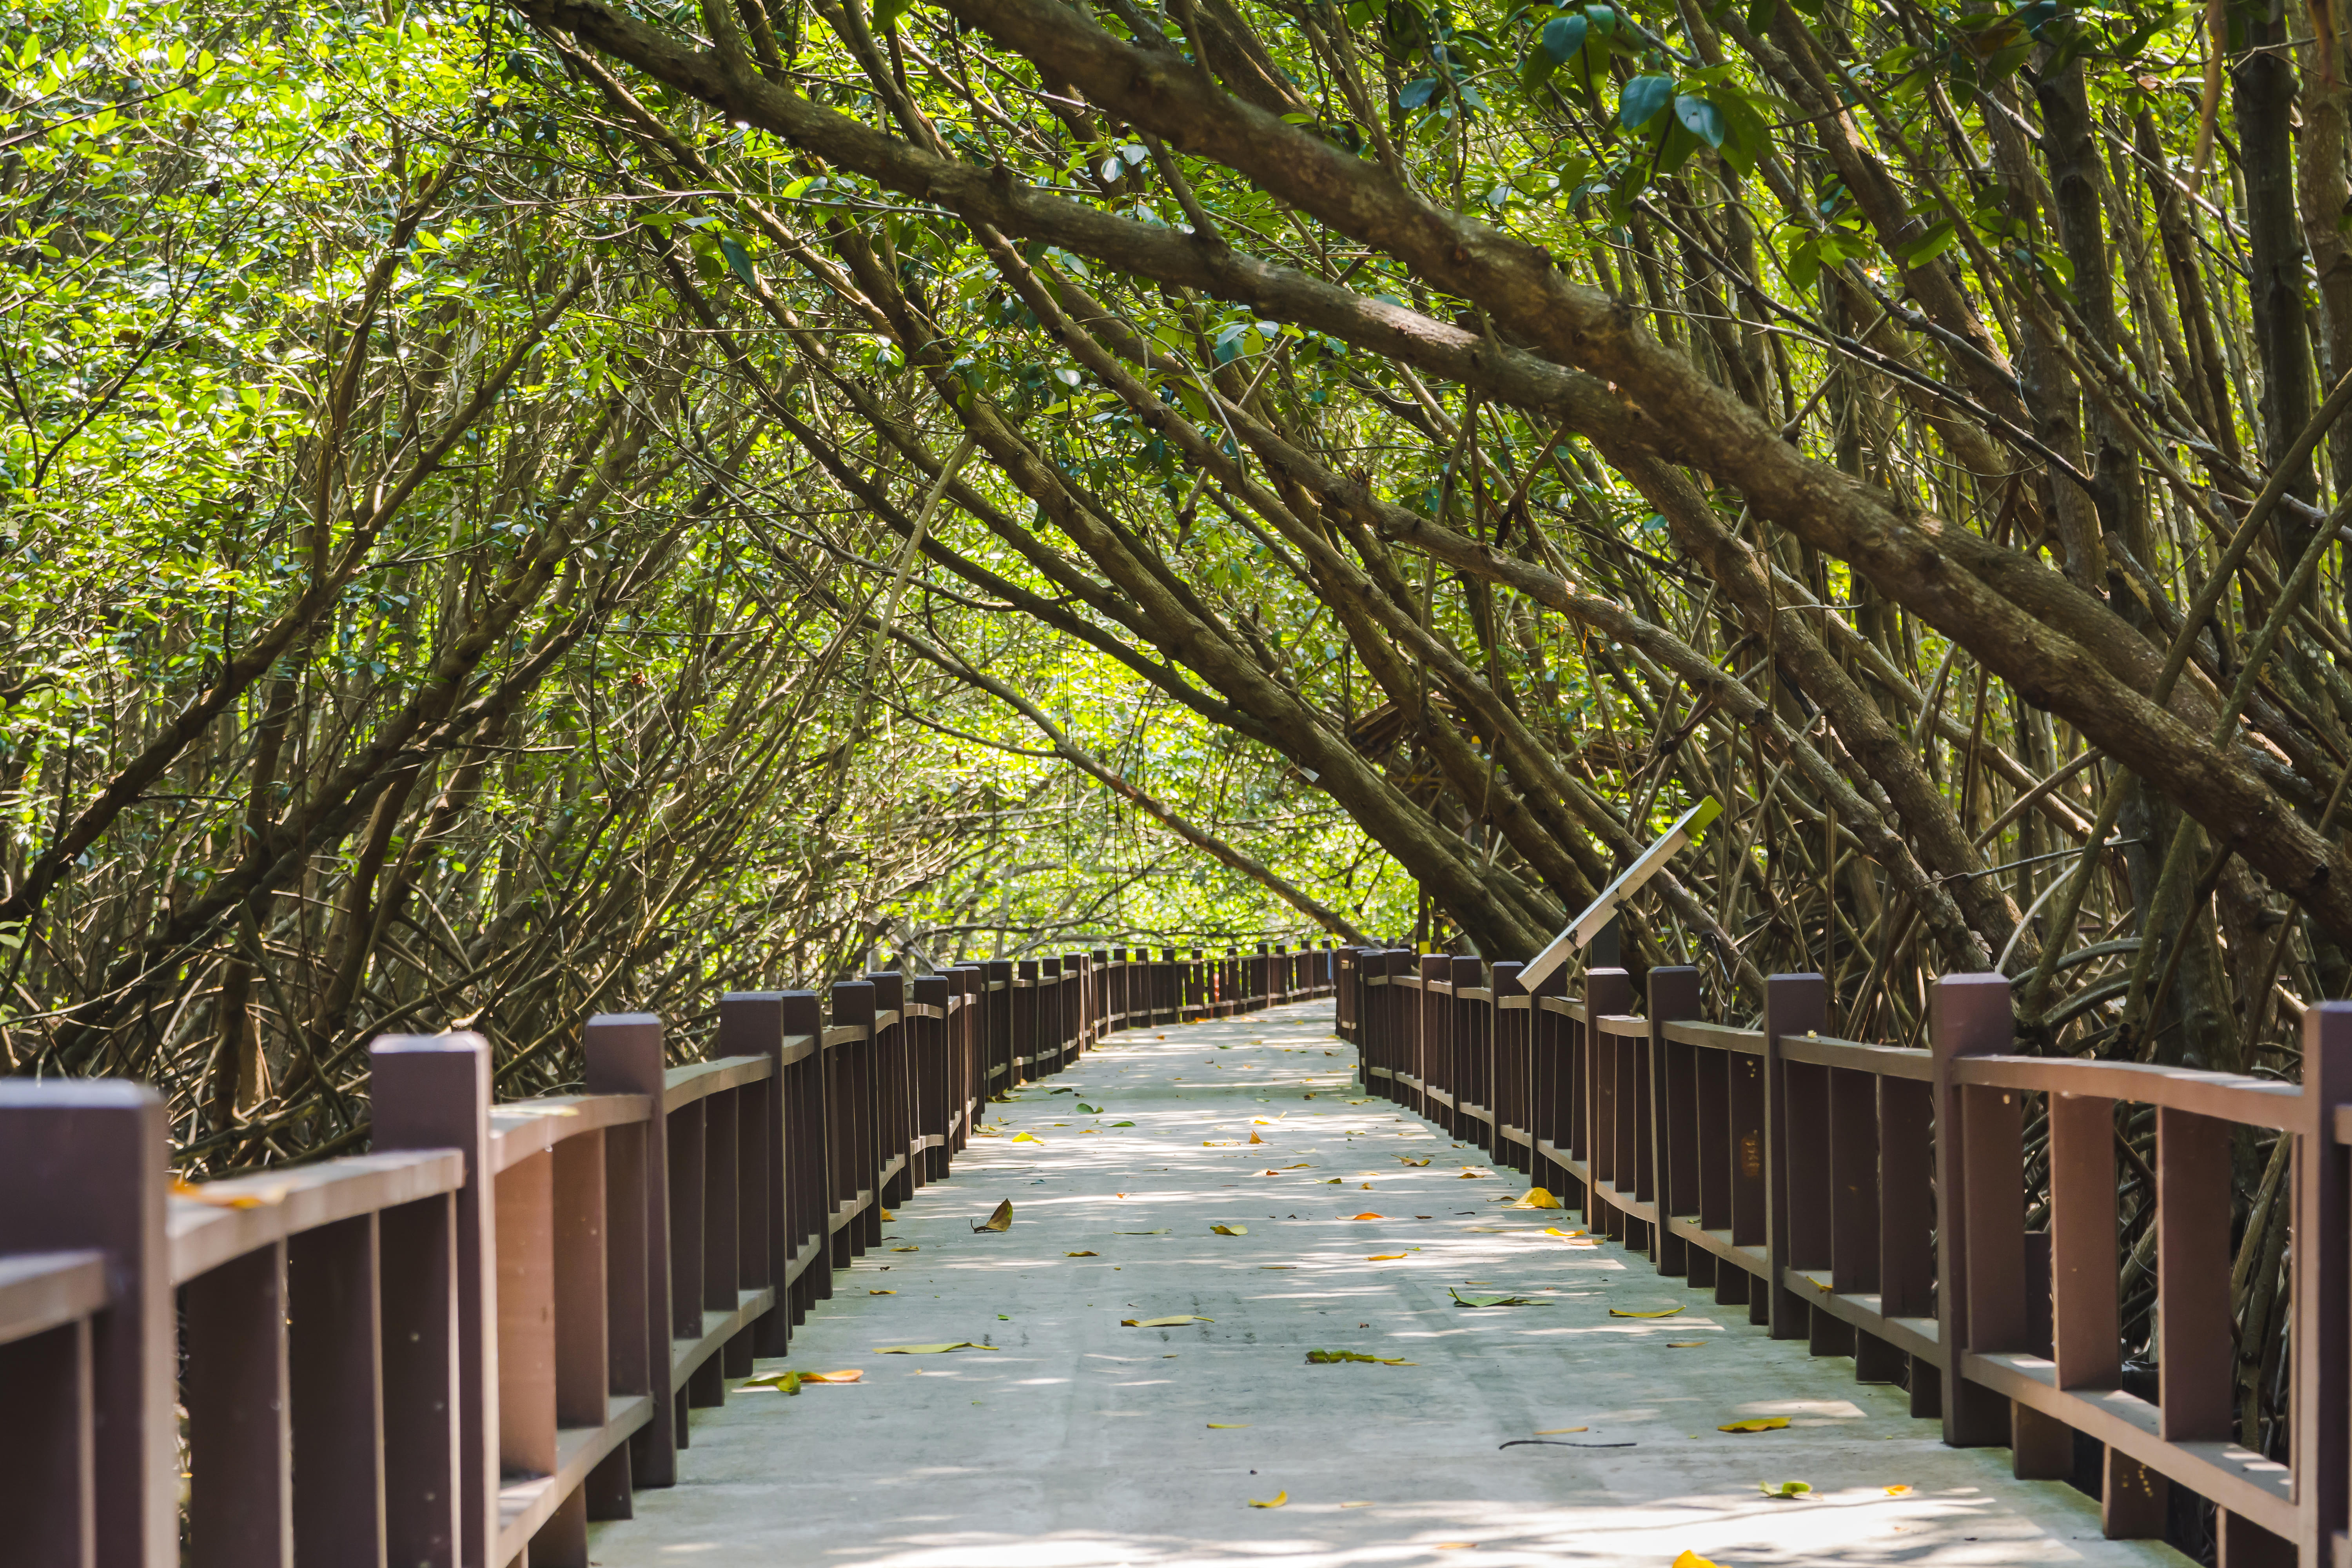 Learn about the Mangrove Ecosystem